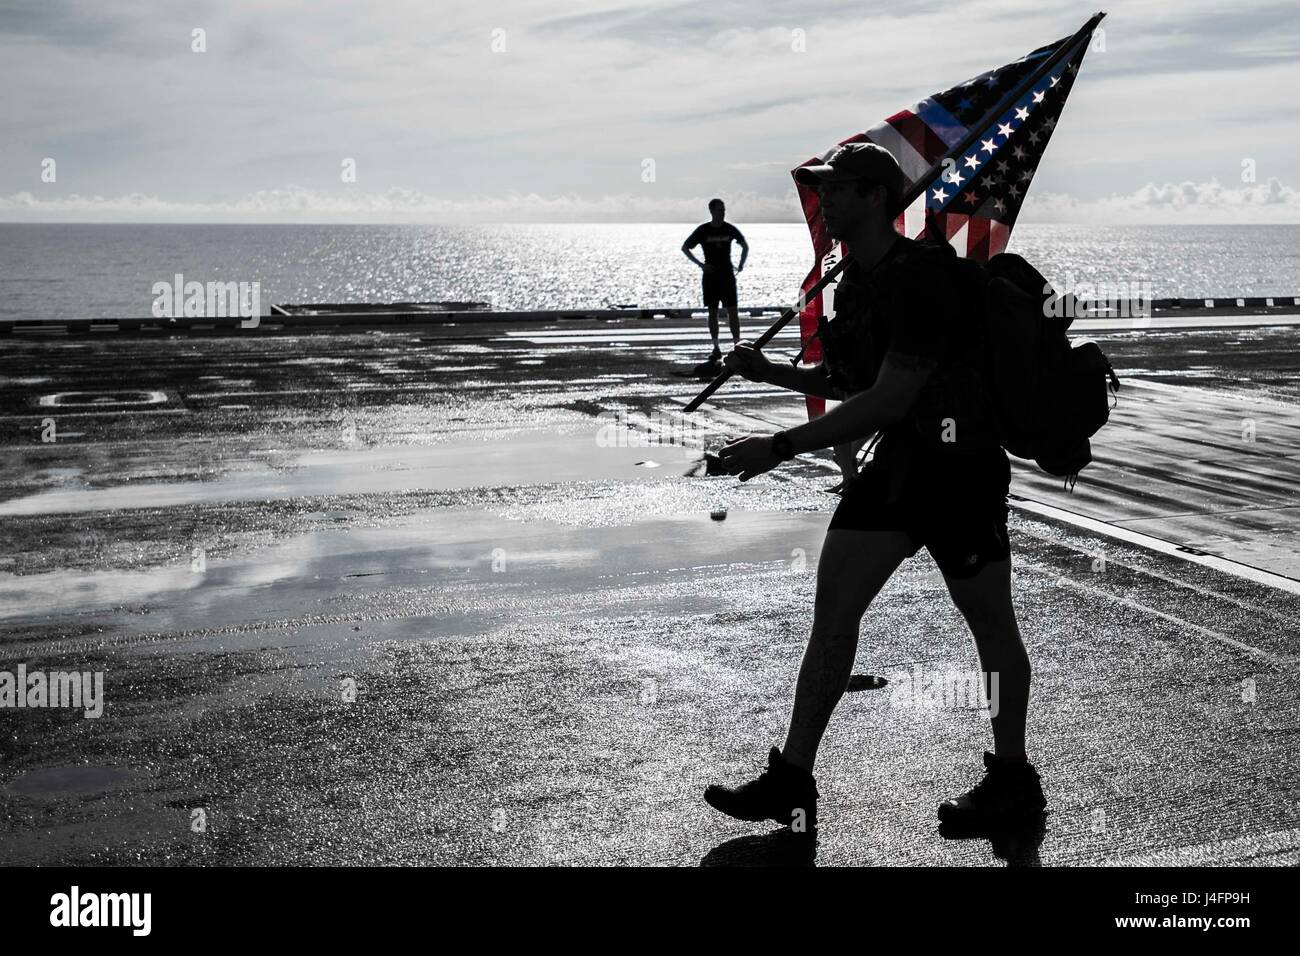 160704-N-NF288-380 SOUTH CHINA SEA (July 4, 2016) Lt. Kris LoveKamp, from St. Louis, carries a 9/11 remembrance flag during a Freedom 5K run on the flight deck of the Navy's only forward-deployed aircraft carrier USS Ronald Reagan (CVN 76) on Independence Day. Ronald Reagan Sailors joined Americans around the world in the celebration of the anniversary of the signing of the Declaration of Independence in 1776. Ronald Reagan, the Carrier Strike Group Five (CSG 5) flagship, is on patrol in the U.S. 7th Fleet area of responsibility supporting security and stability in the Indo-Asia-Pacific region Stock Photo